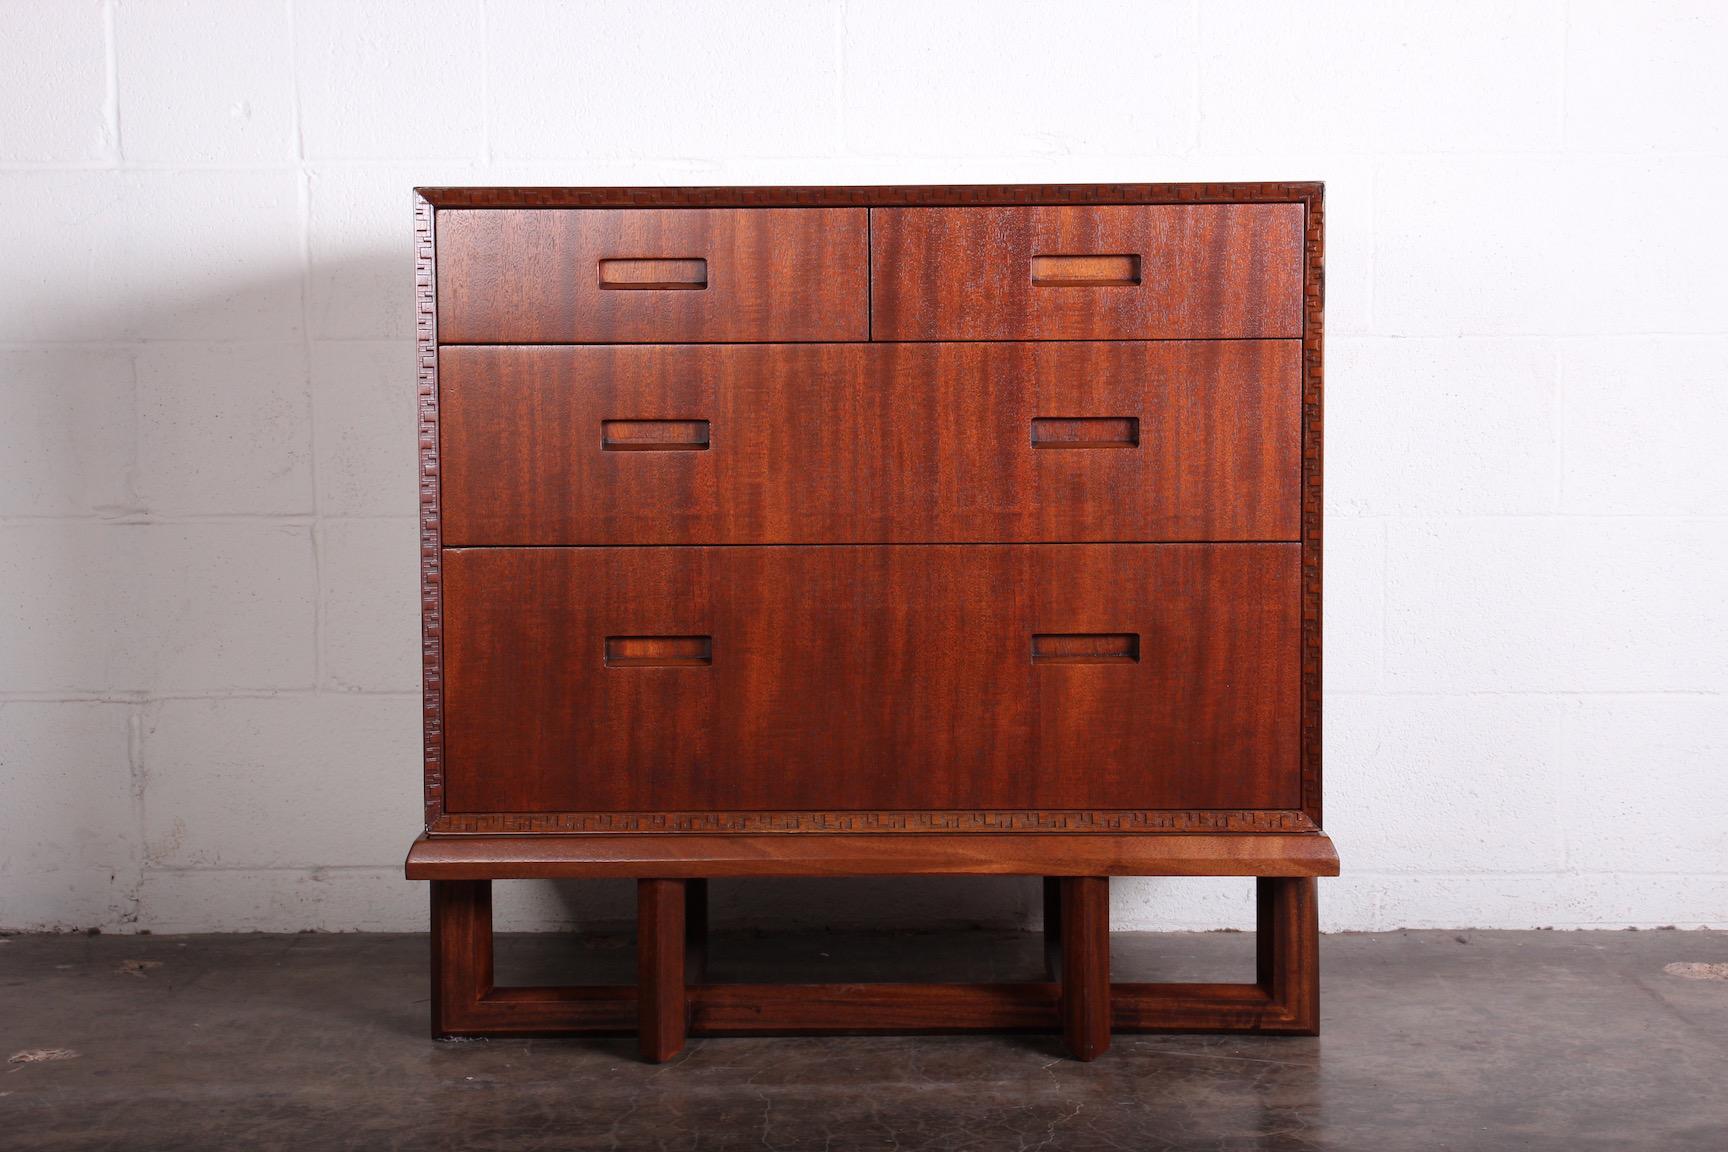 A rare mahogany chest of drawers on stand designed by Frank Lloyd Wright for Henredon.